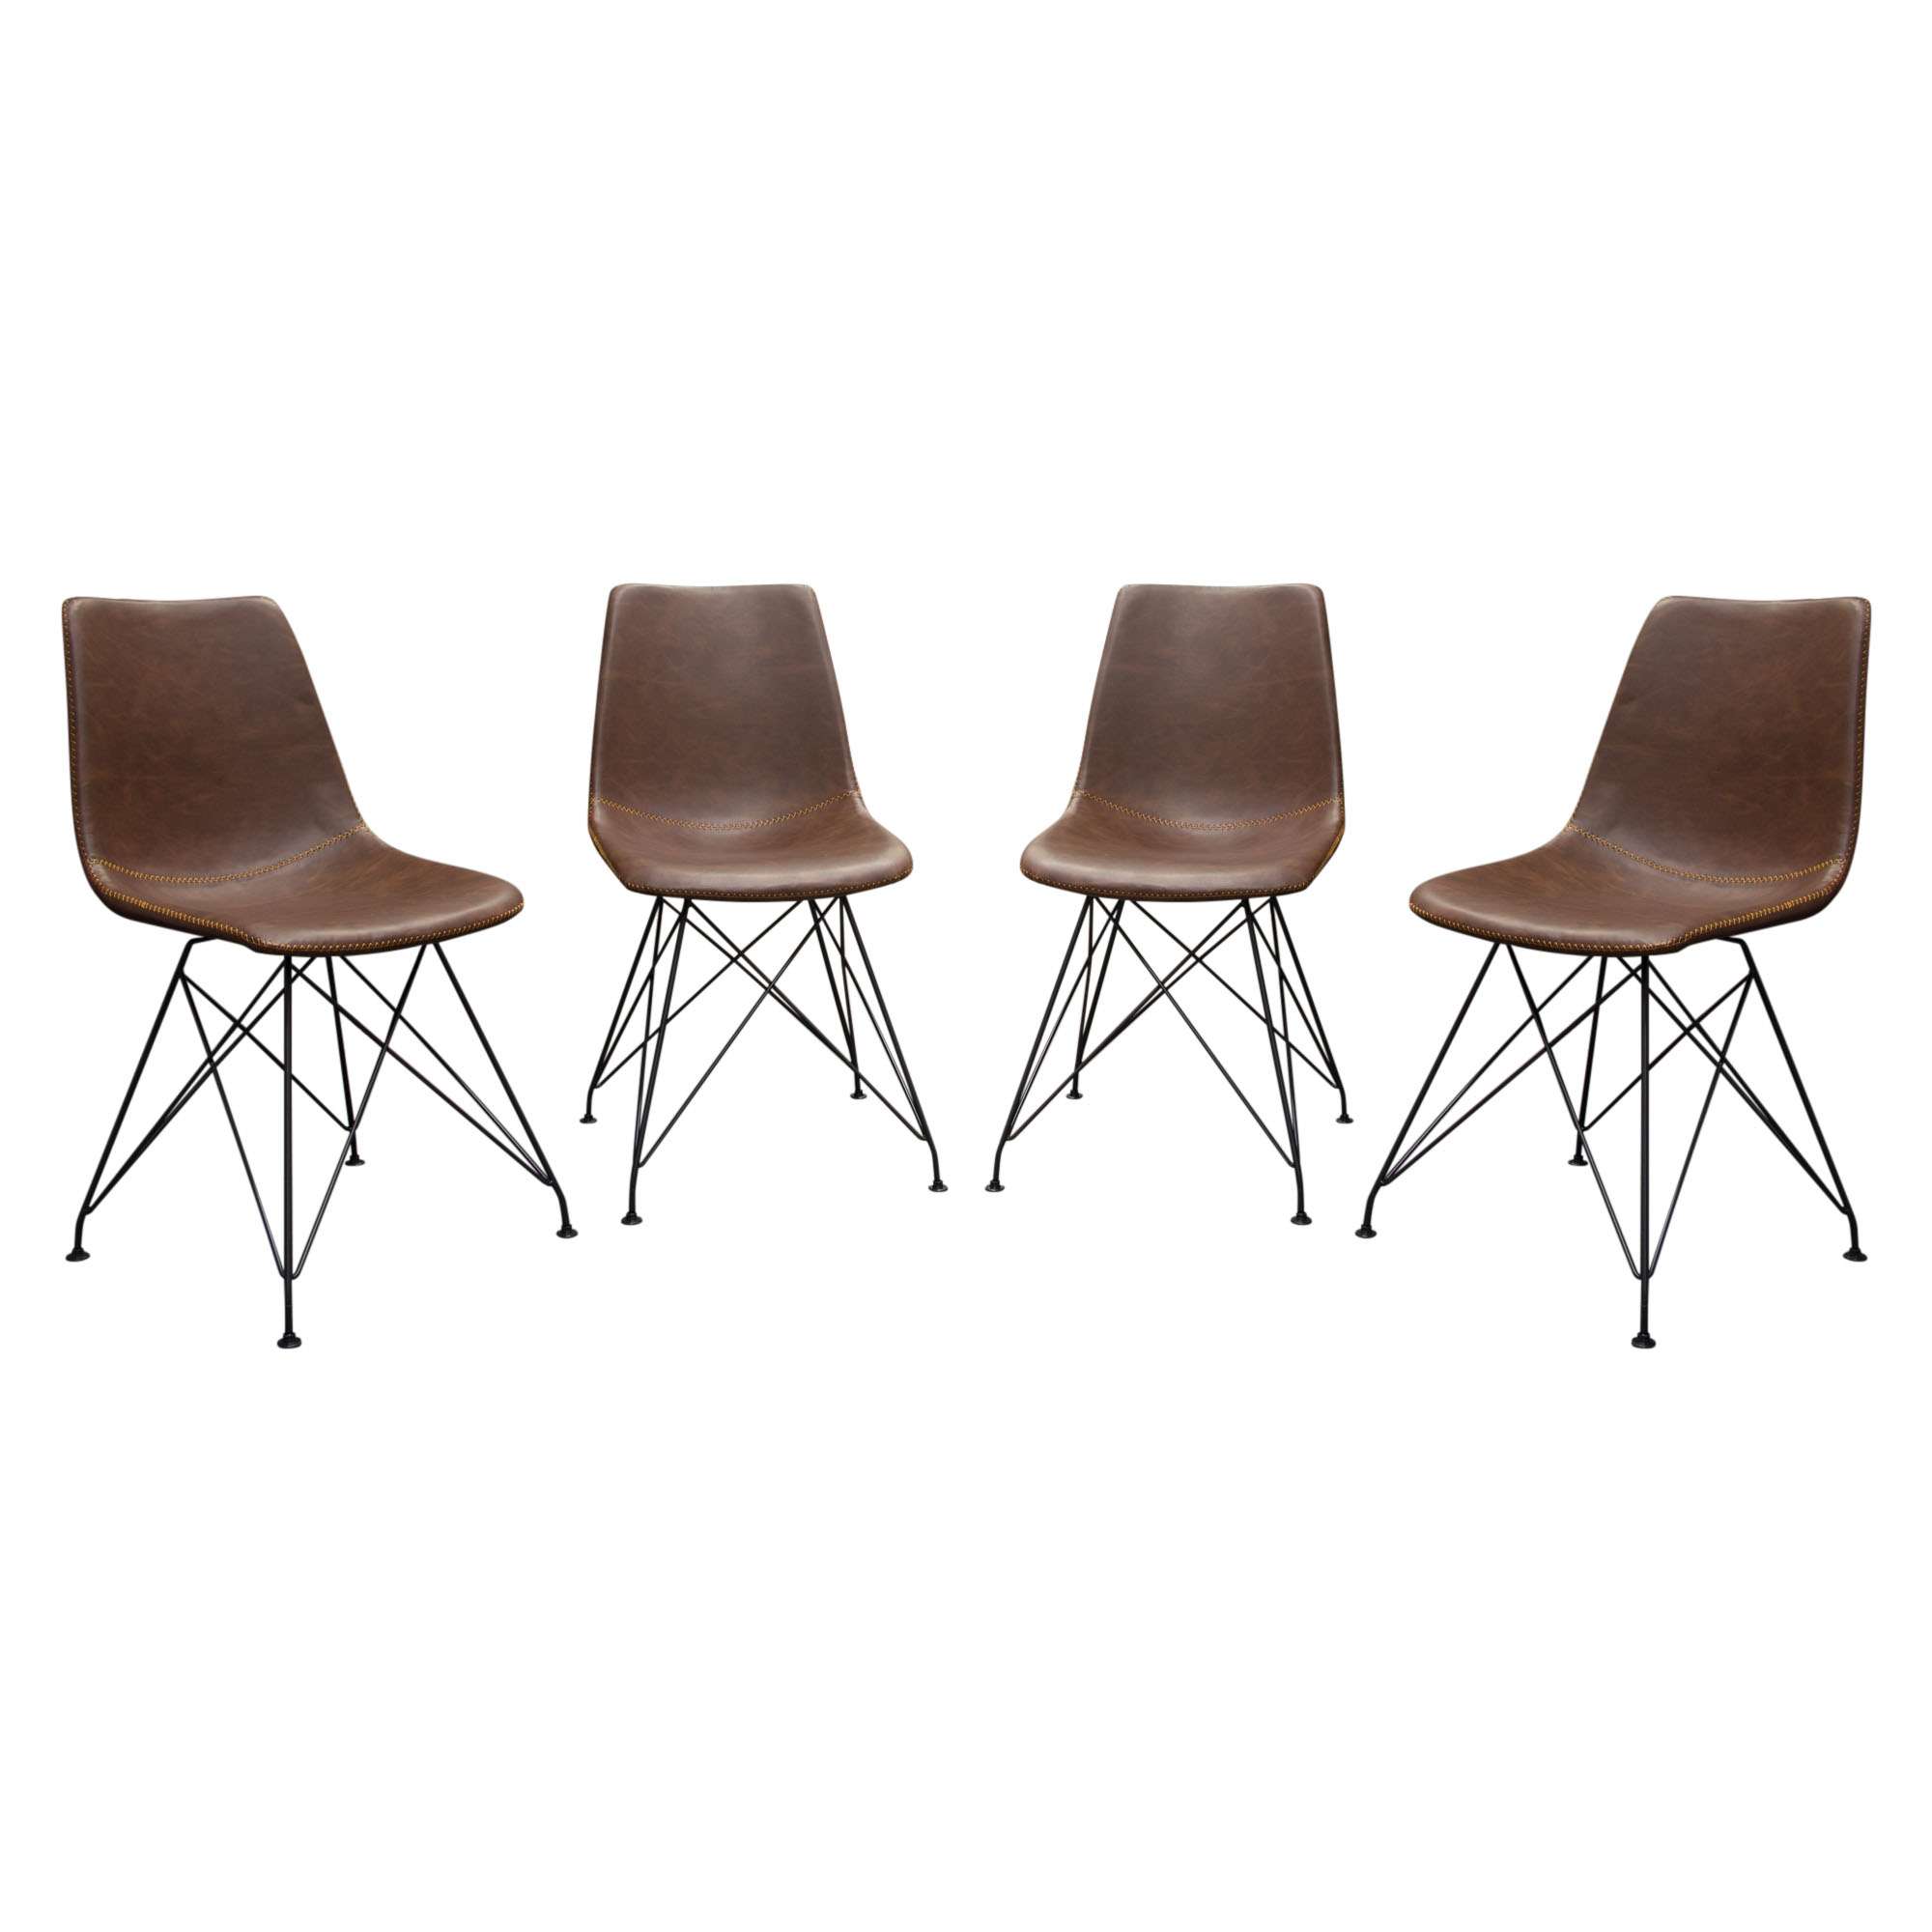 Theo Set of (4) Dining Chairs in Chocolate Leatherette w/ Black Metal Base by Diamond Sofa - Decorian Group